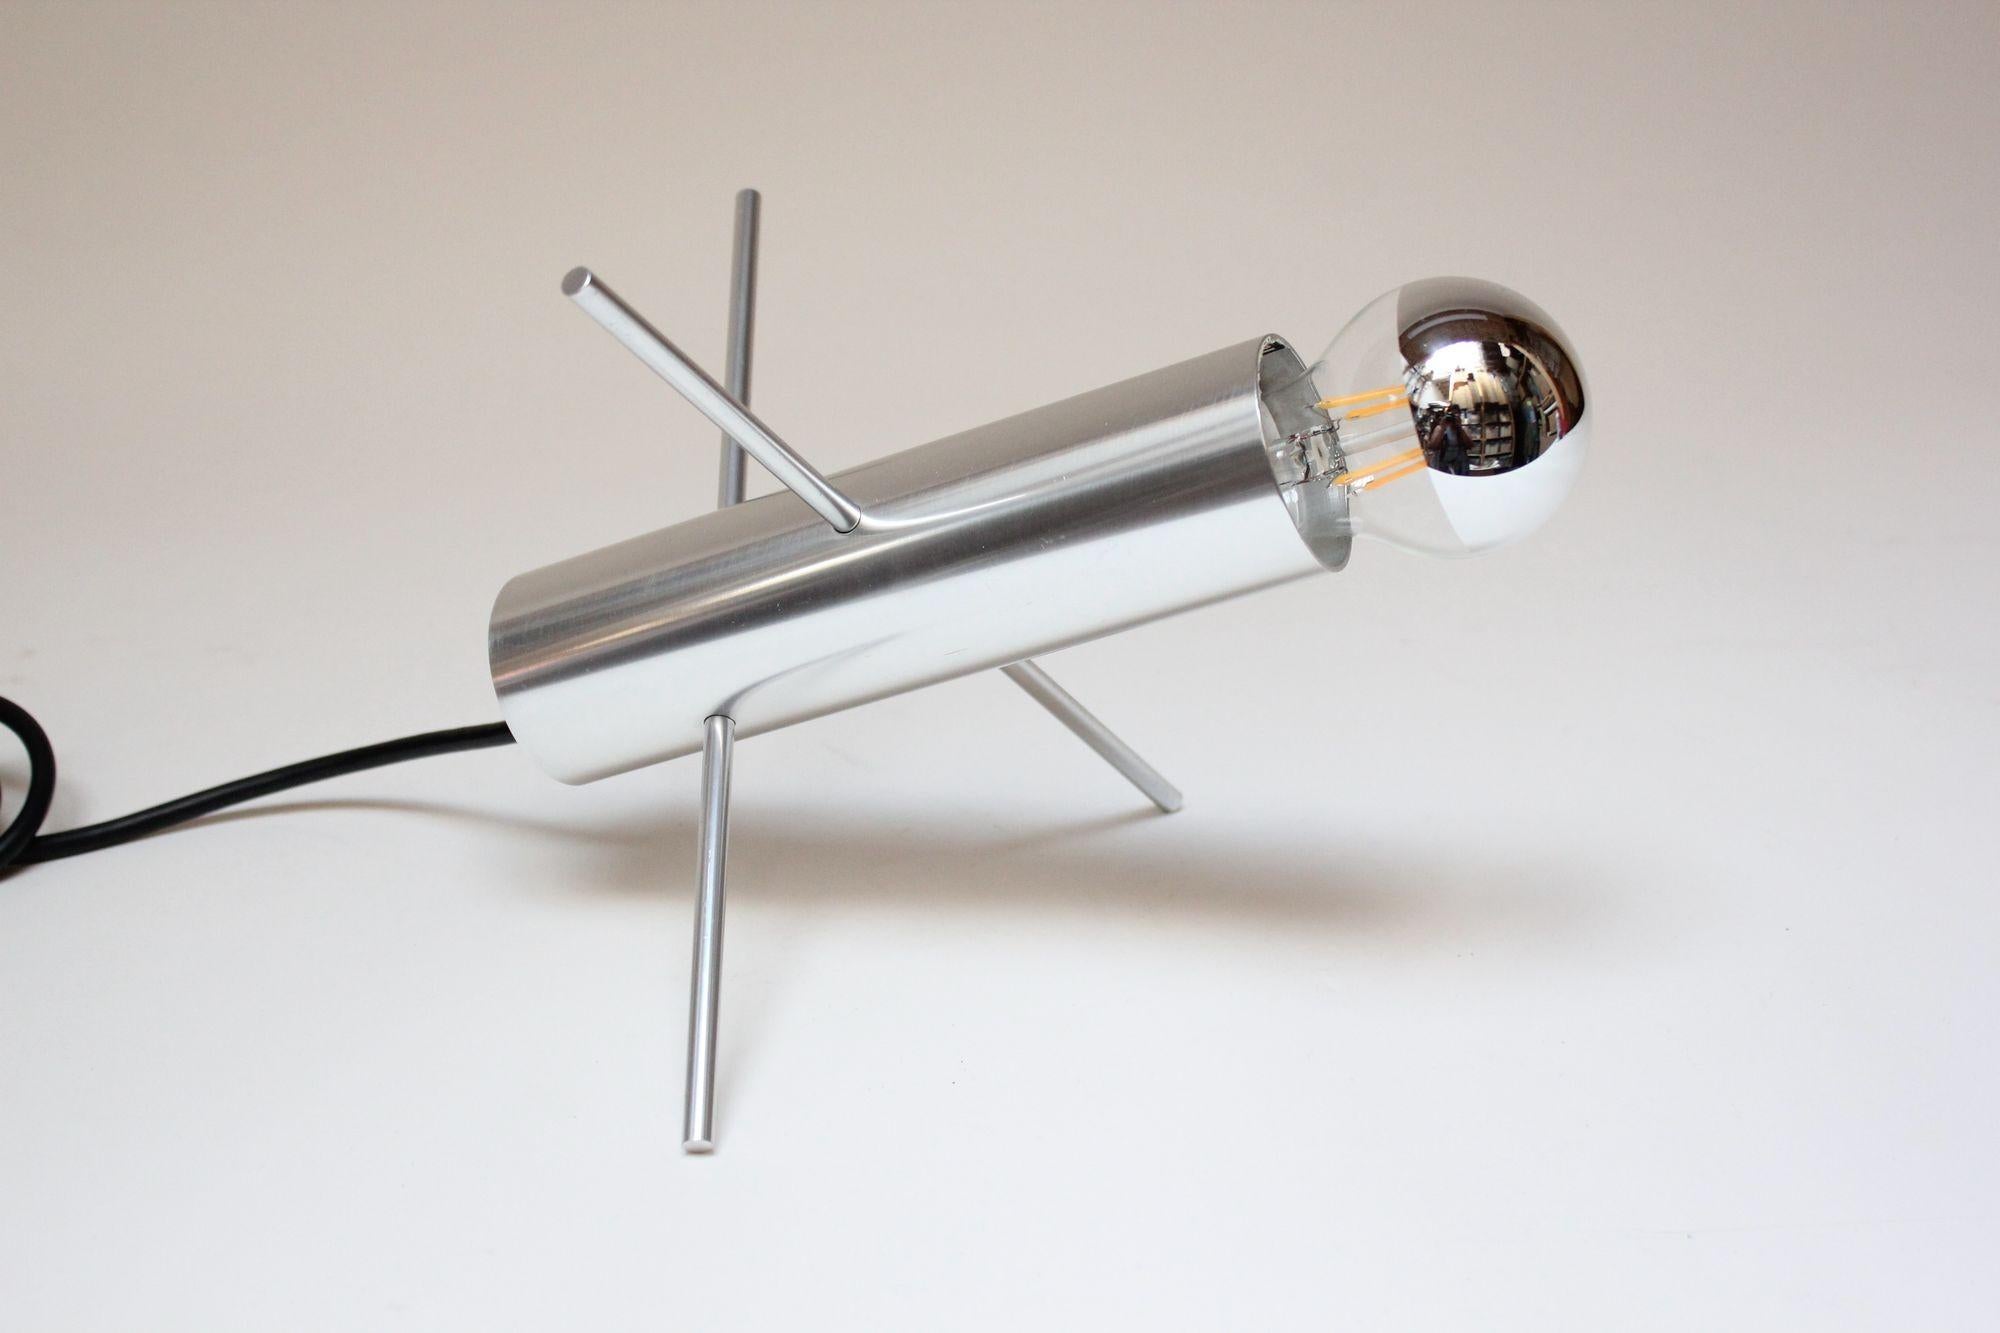 Modest-form 'Krekel' / 'Cricket' table lamp, model R-60 designed by Otto Wach for RAAK (Holland, 1962).
Composed of a brushed aluminum cylinder with four perforations housing two intersecting aluminum rods/pins that support the structure.
Can be